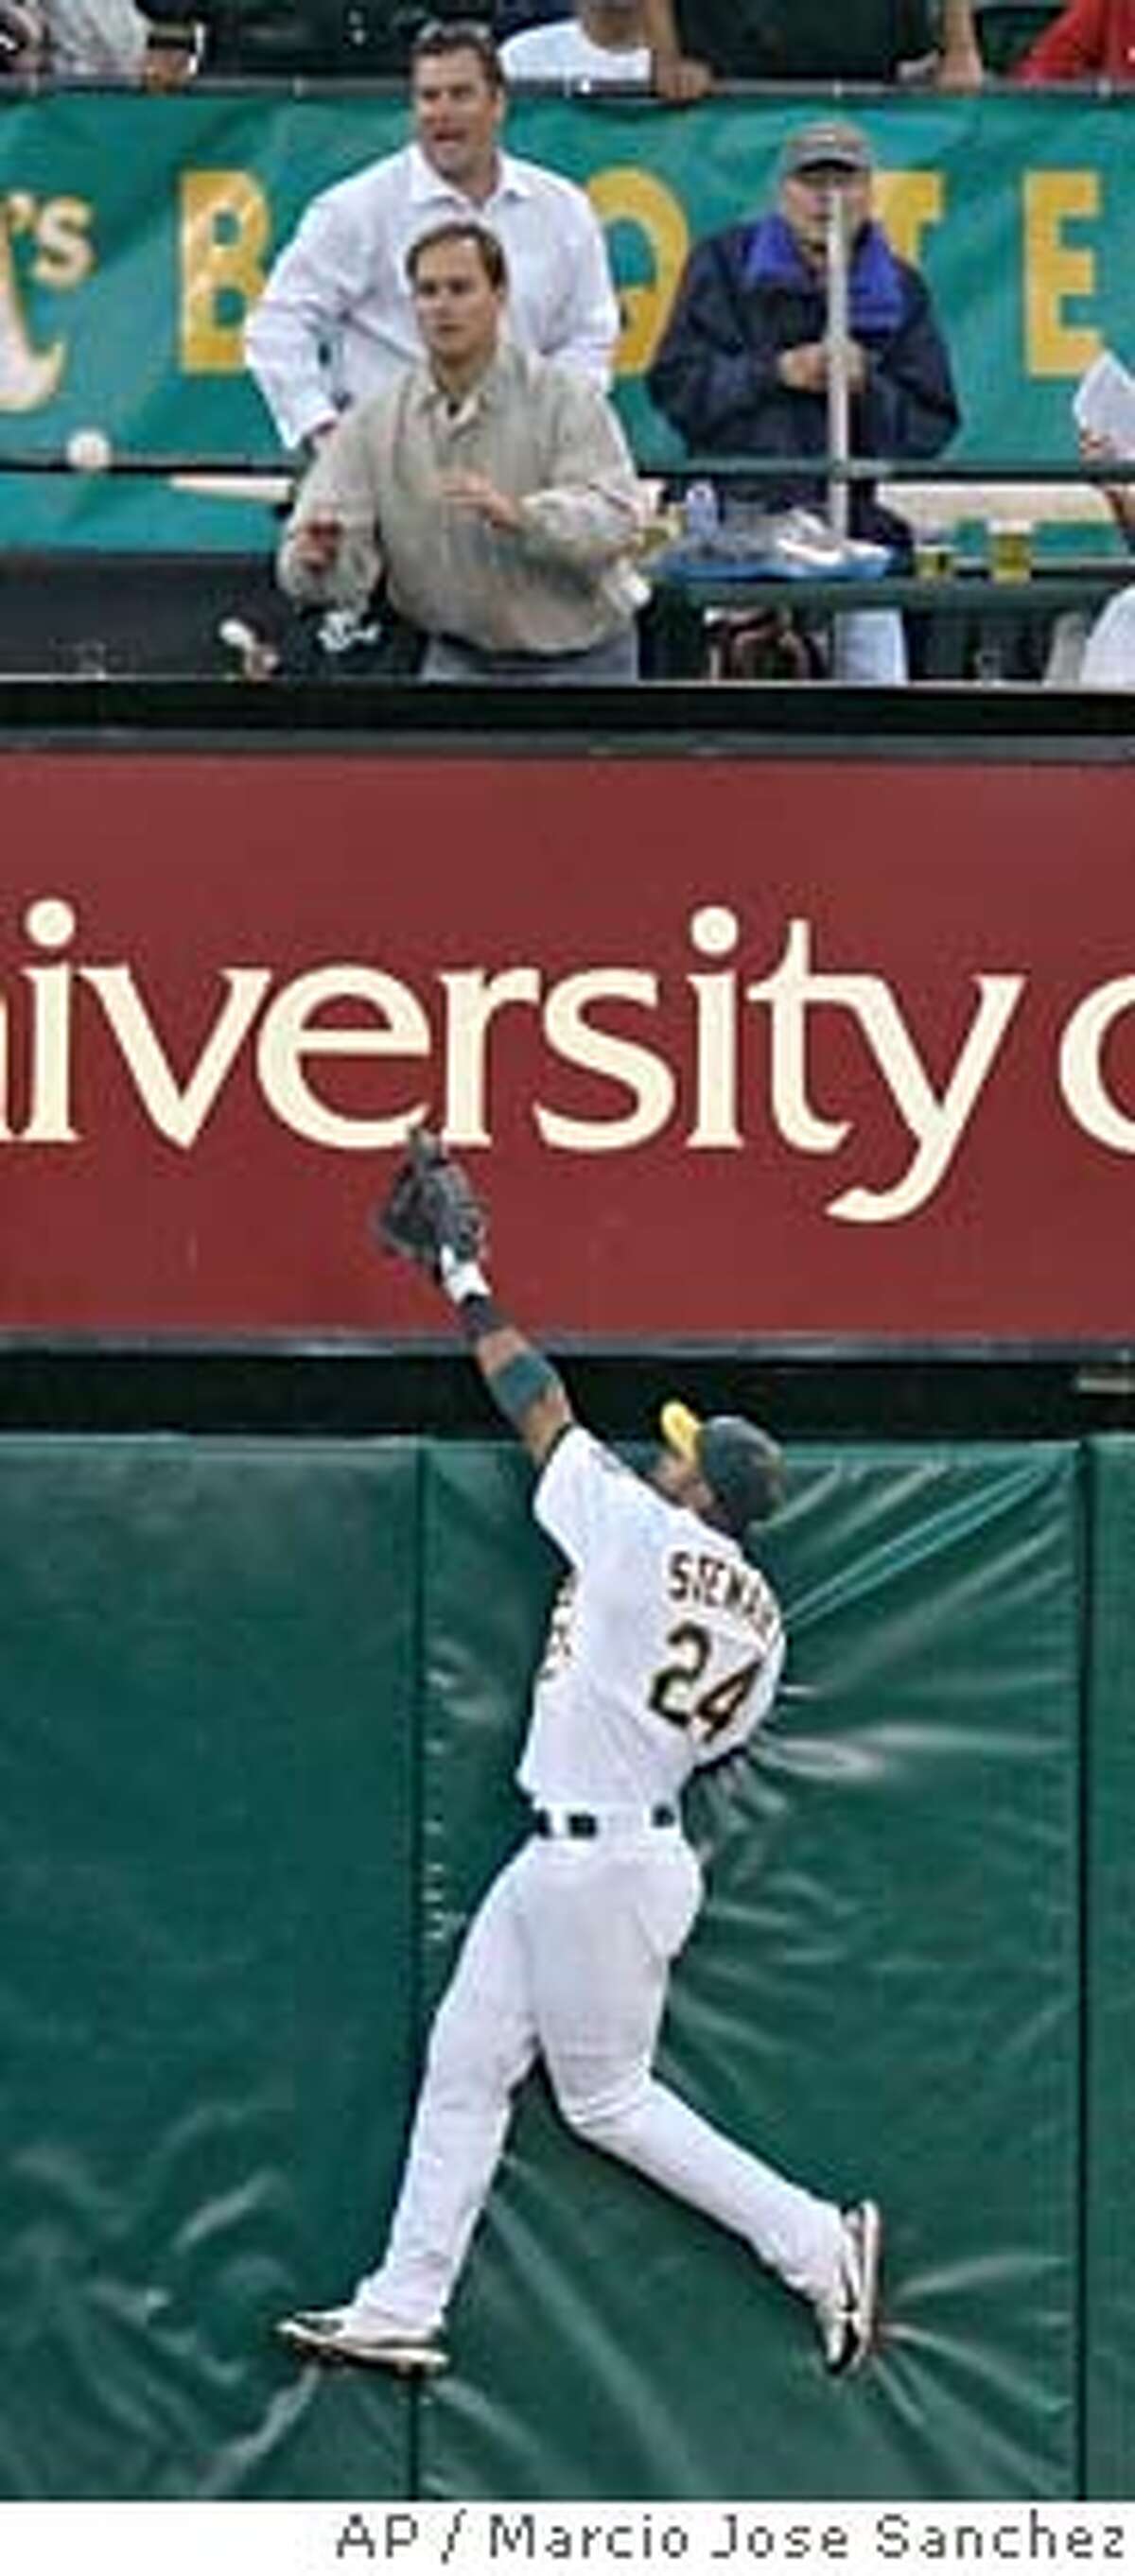 Oakland Athletics left fielder Shannon Stewart fails on a leaping attempt to catch a home run by Los Angeles Angels' Vladimir Guerrero in the fourth inning of a baseball game in Oakland, Calif., Thursday, Aug. 2, 2007. (AP Photo/Marcio Jose Sanchez)